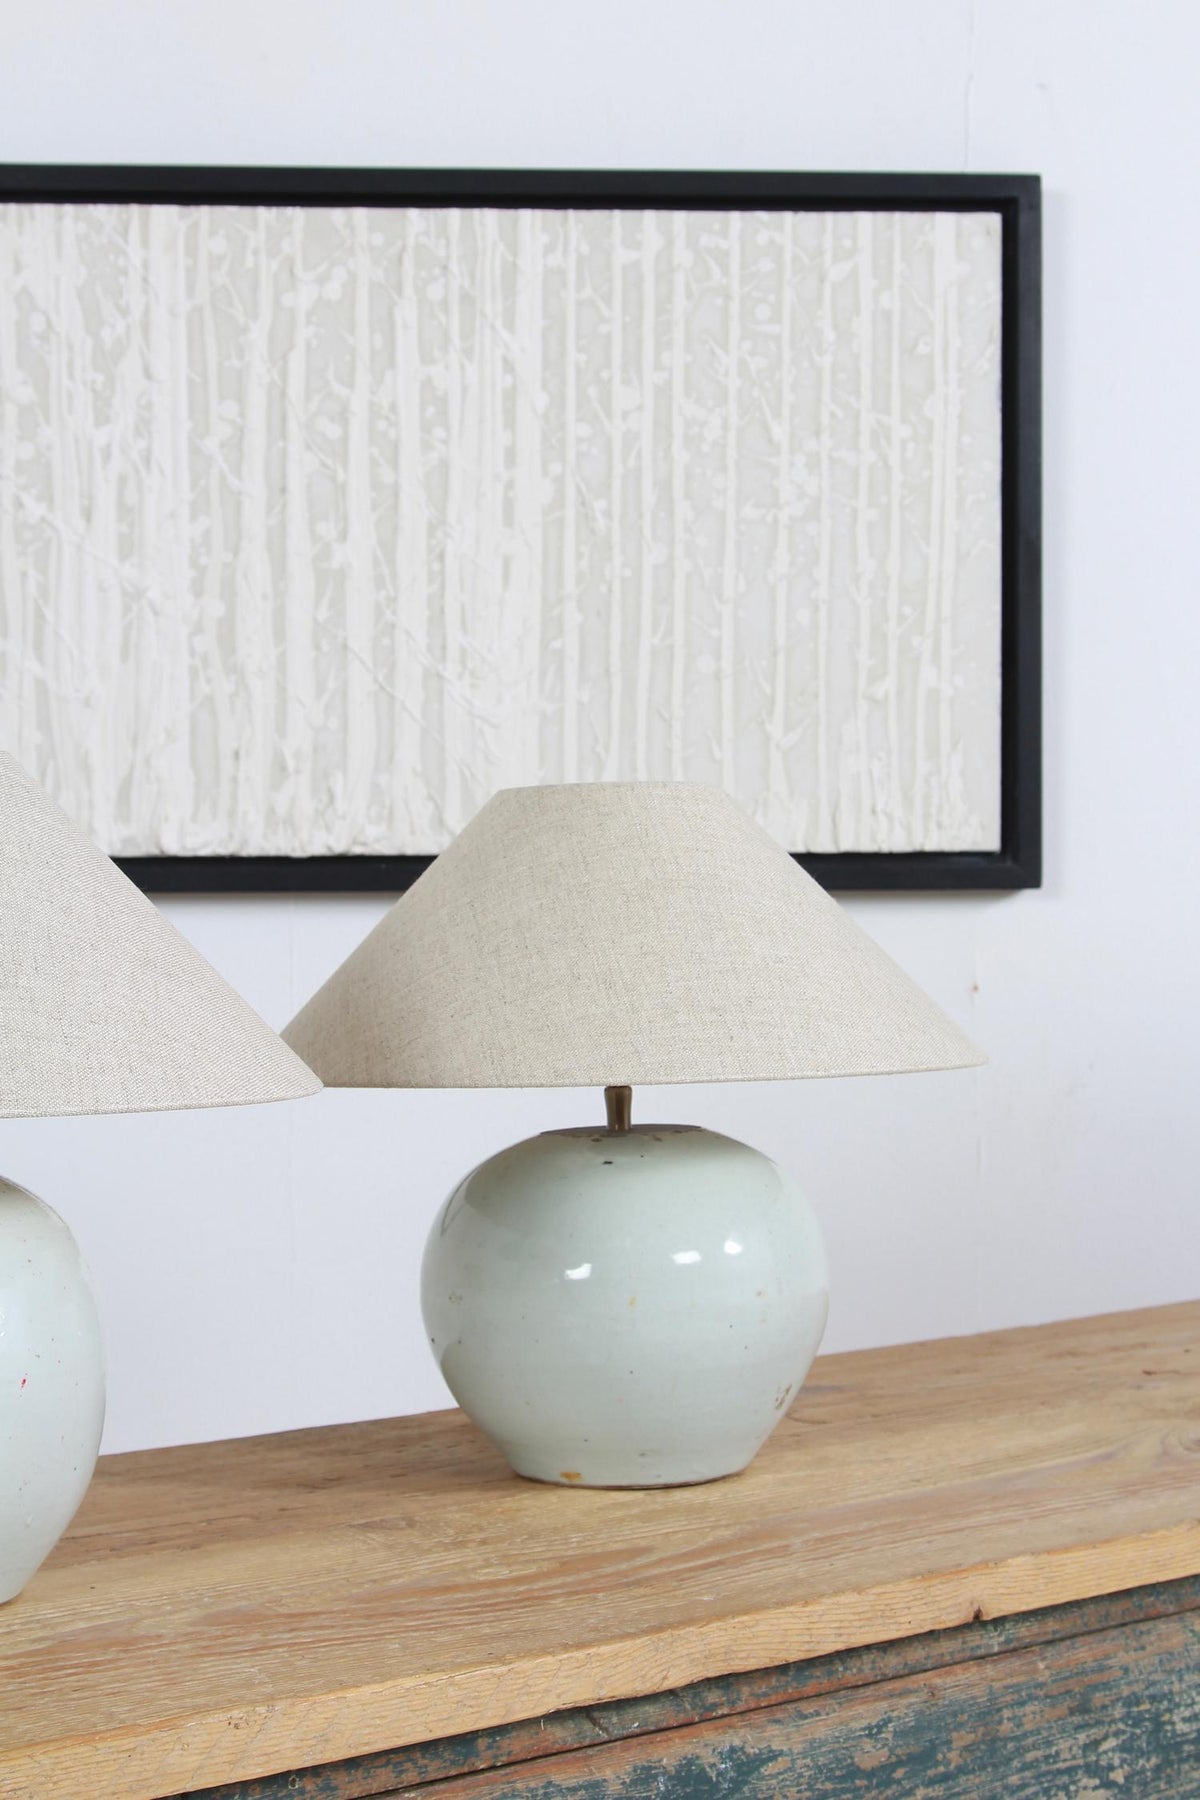 CHARMING Near Pair of  ANTIQUE CHINESE GINGER JAR TABLE LAMPs WITH NATURAL LINEN SHADES